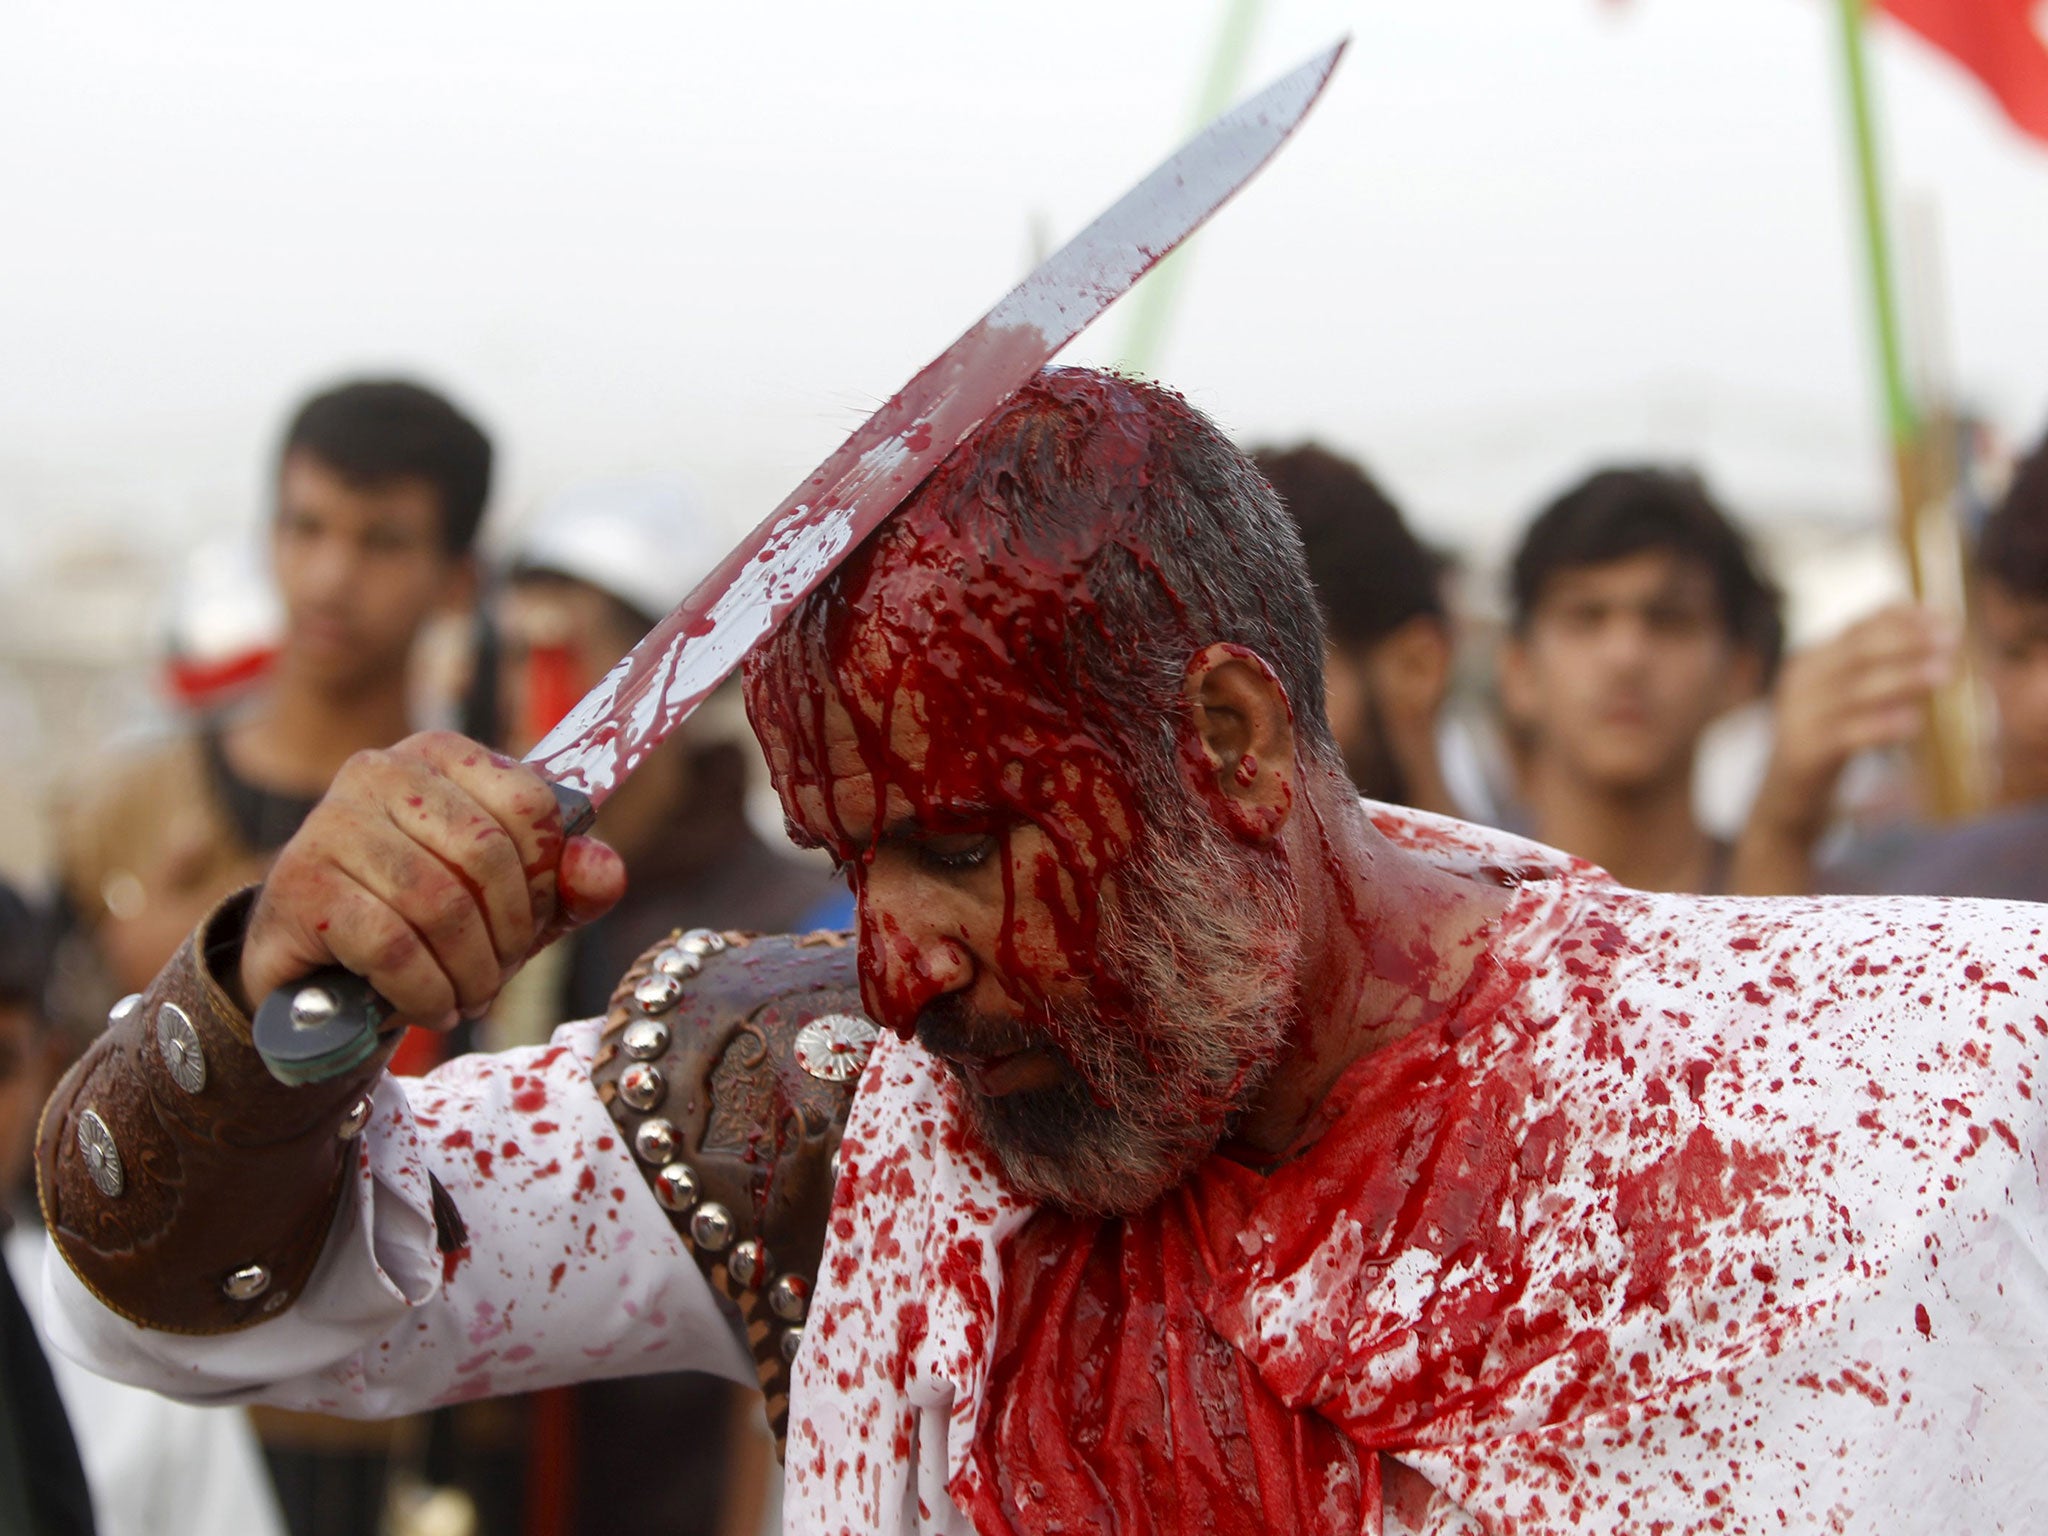 Iraq Shi'ite Muslim men bleed as they slice their foreheads with swords and beat themselves to commemorate Ashura in Sadr City, Baghdad.